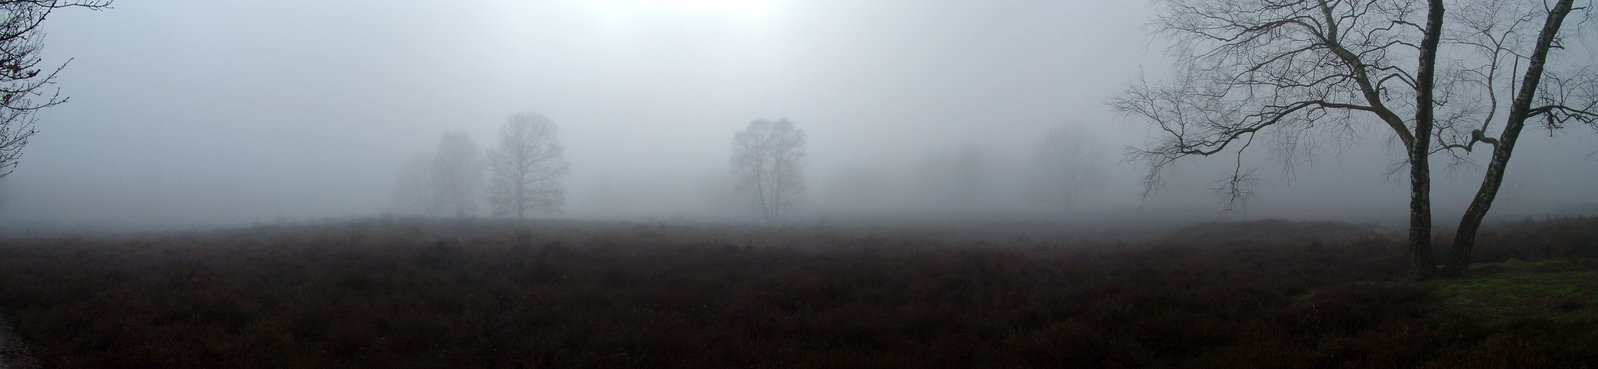 some bare trees and grass in the mist